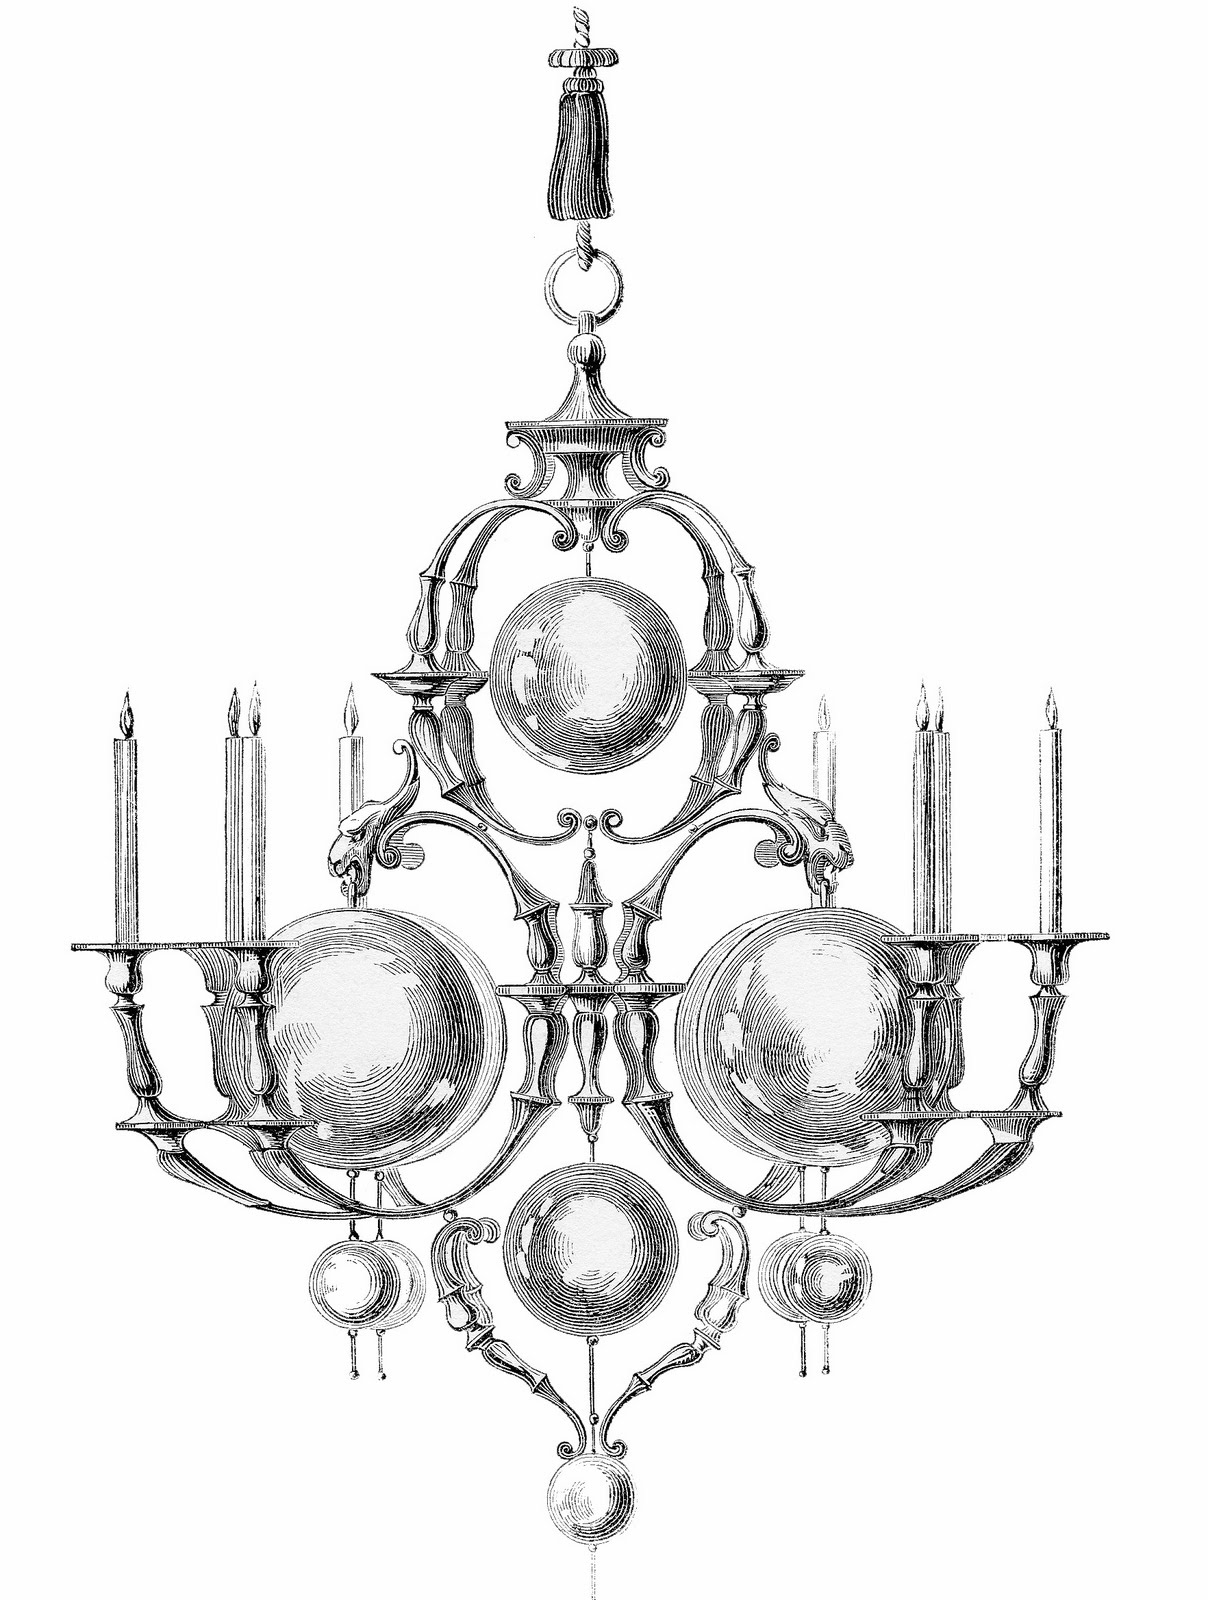 Thursday is Request Day - Chandelier, Iron Bed, Washbowl 